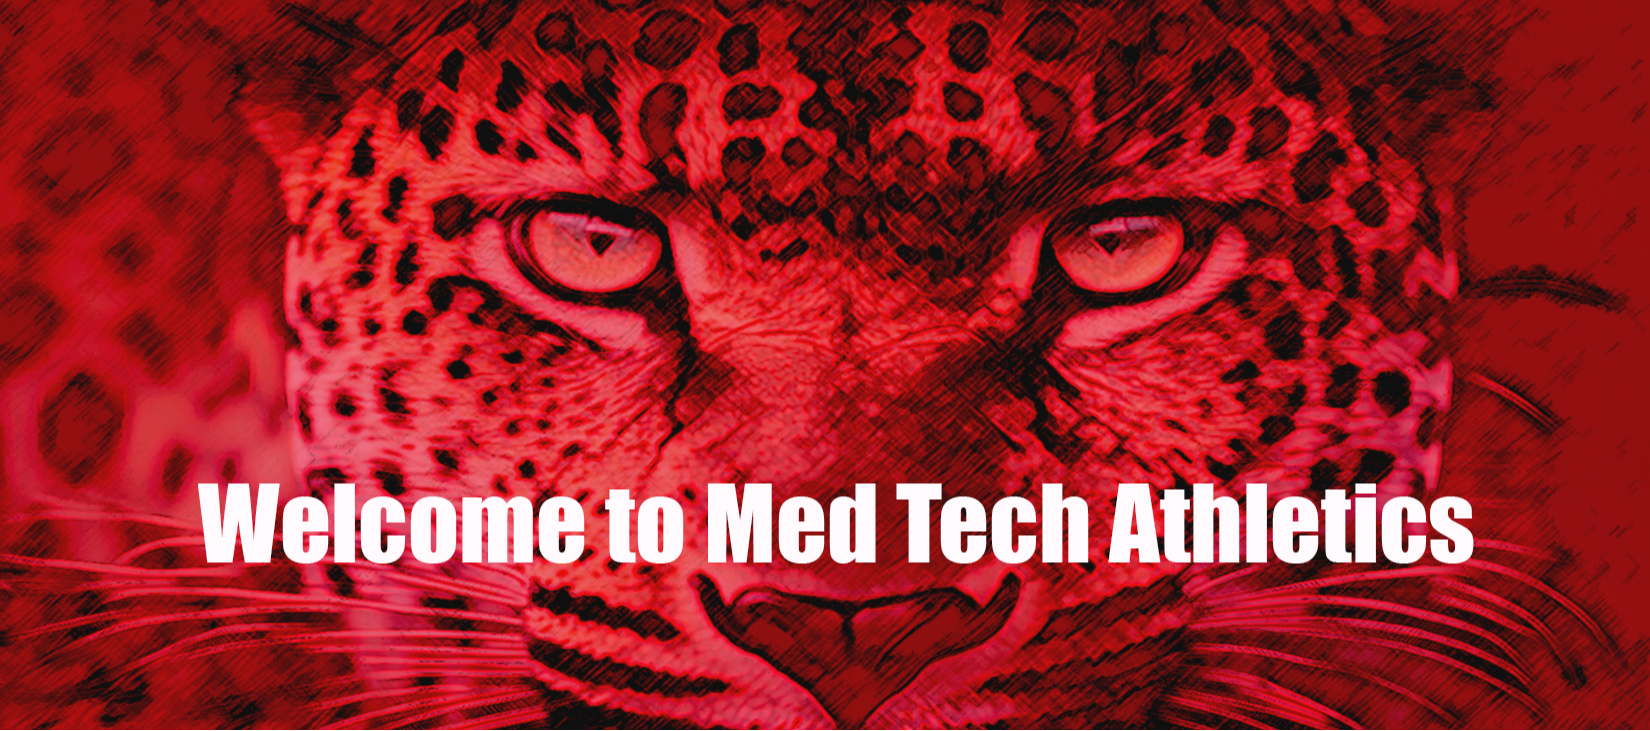 panther image and Welcome to Med Tech Athletics